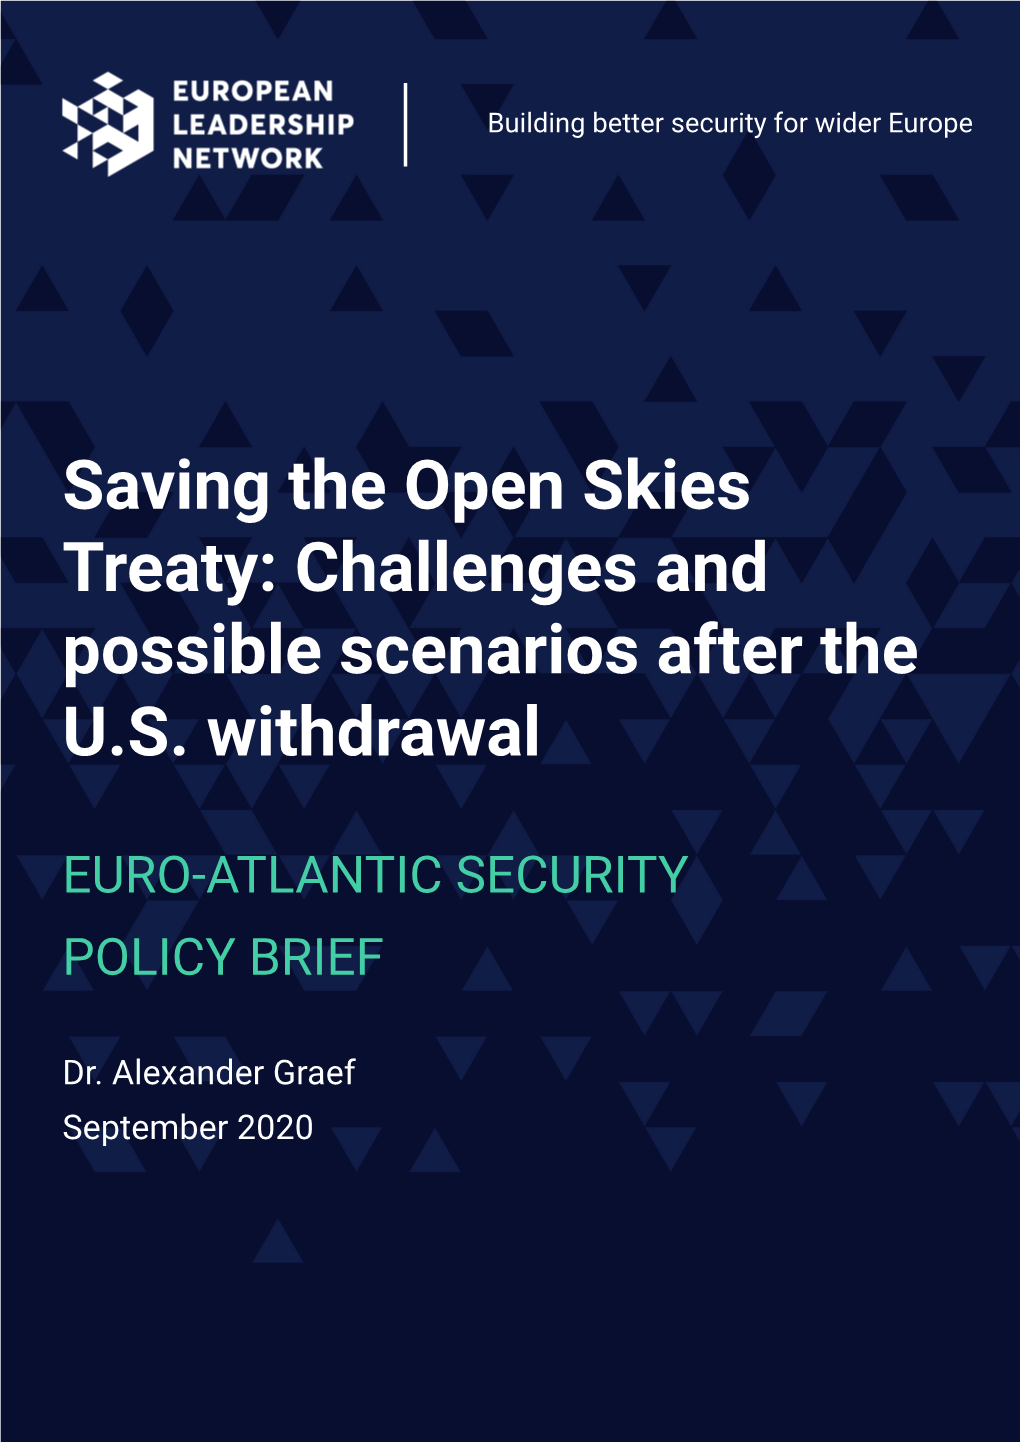 Saving the Open Skies Treaty: Challenges and Possible Scenarios After the U.S